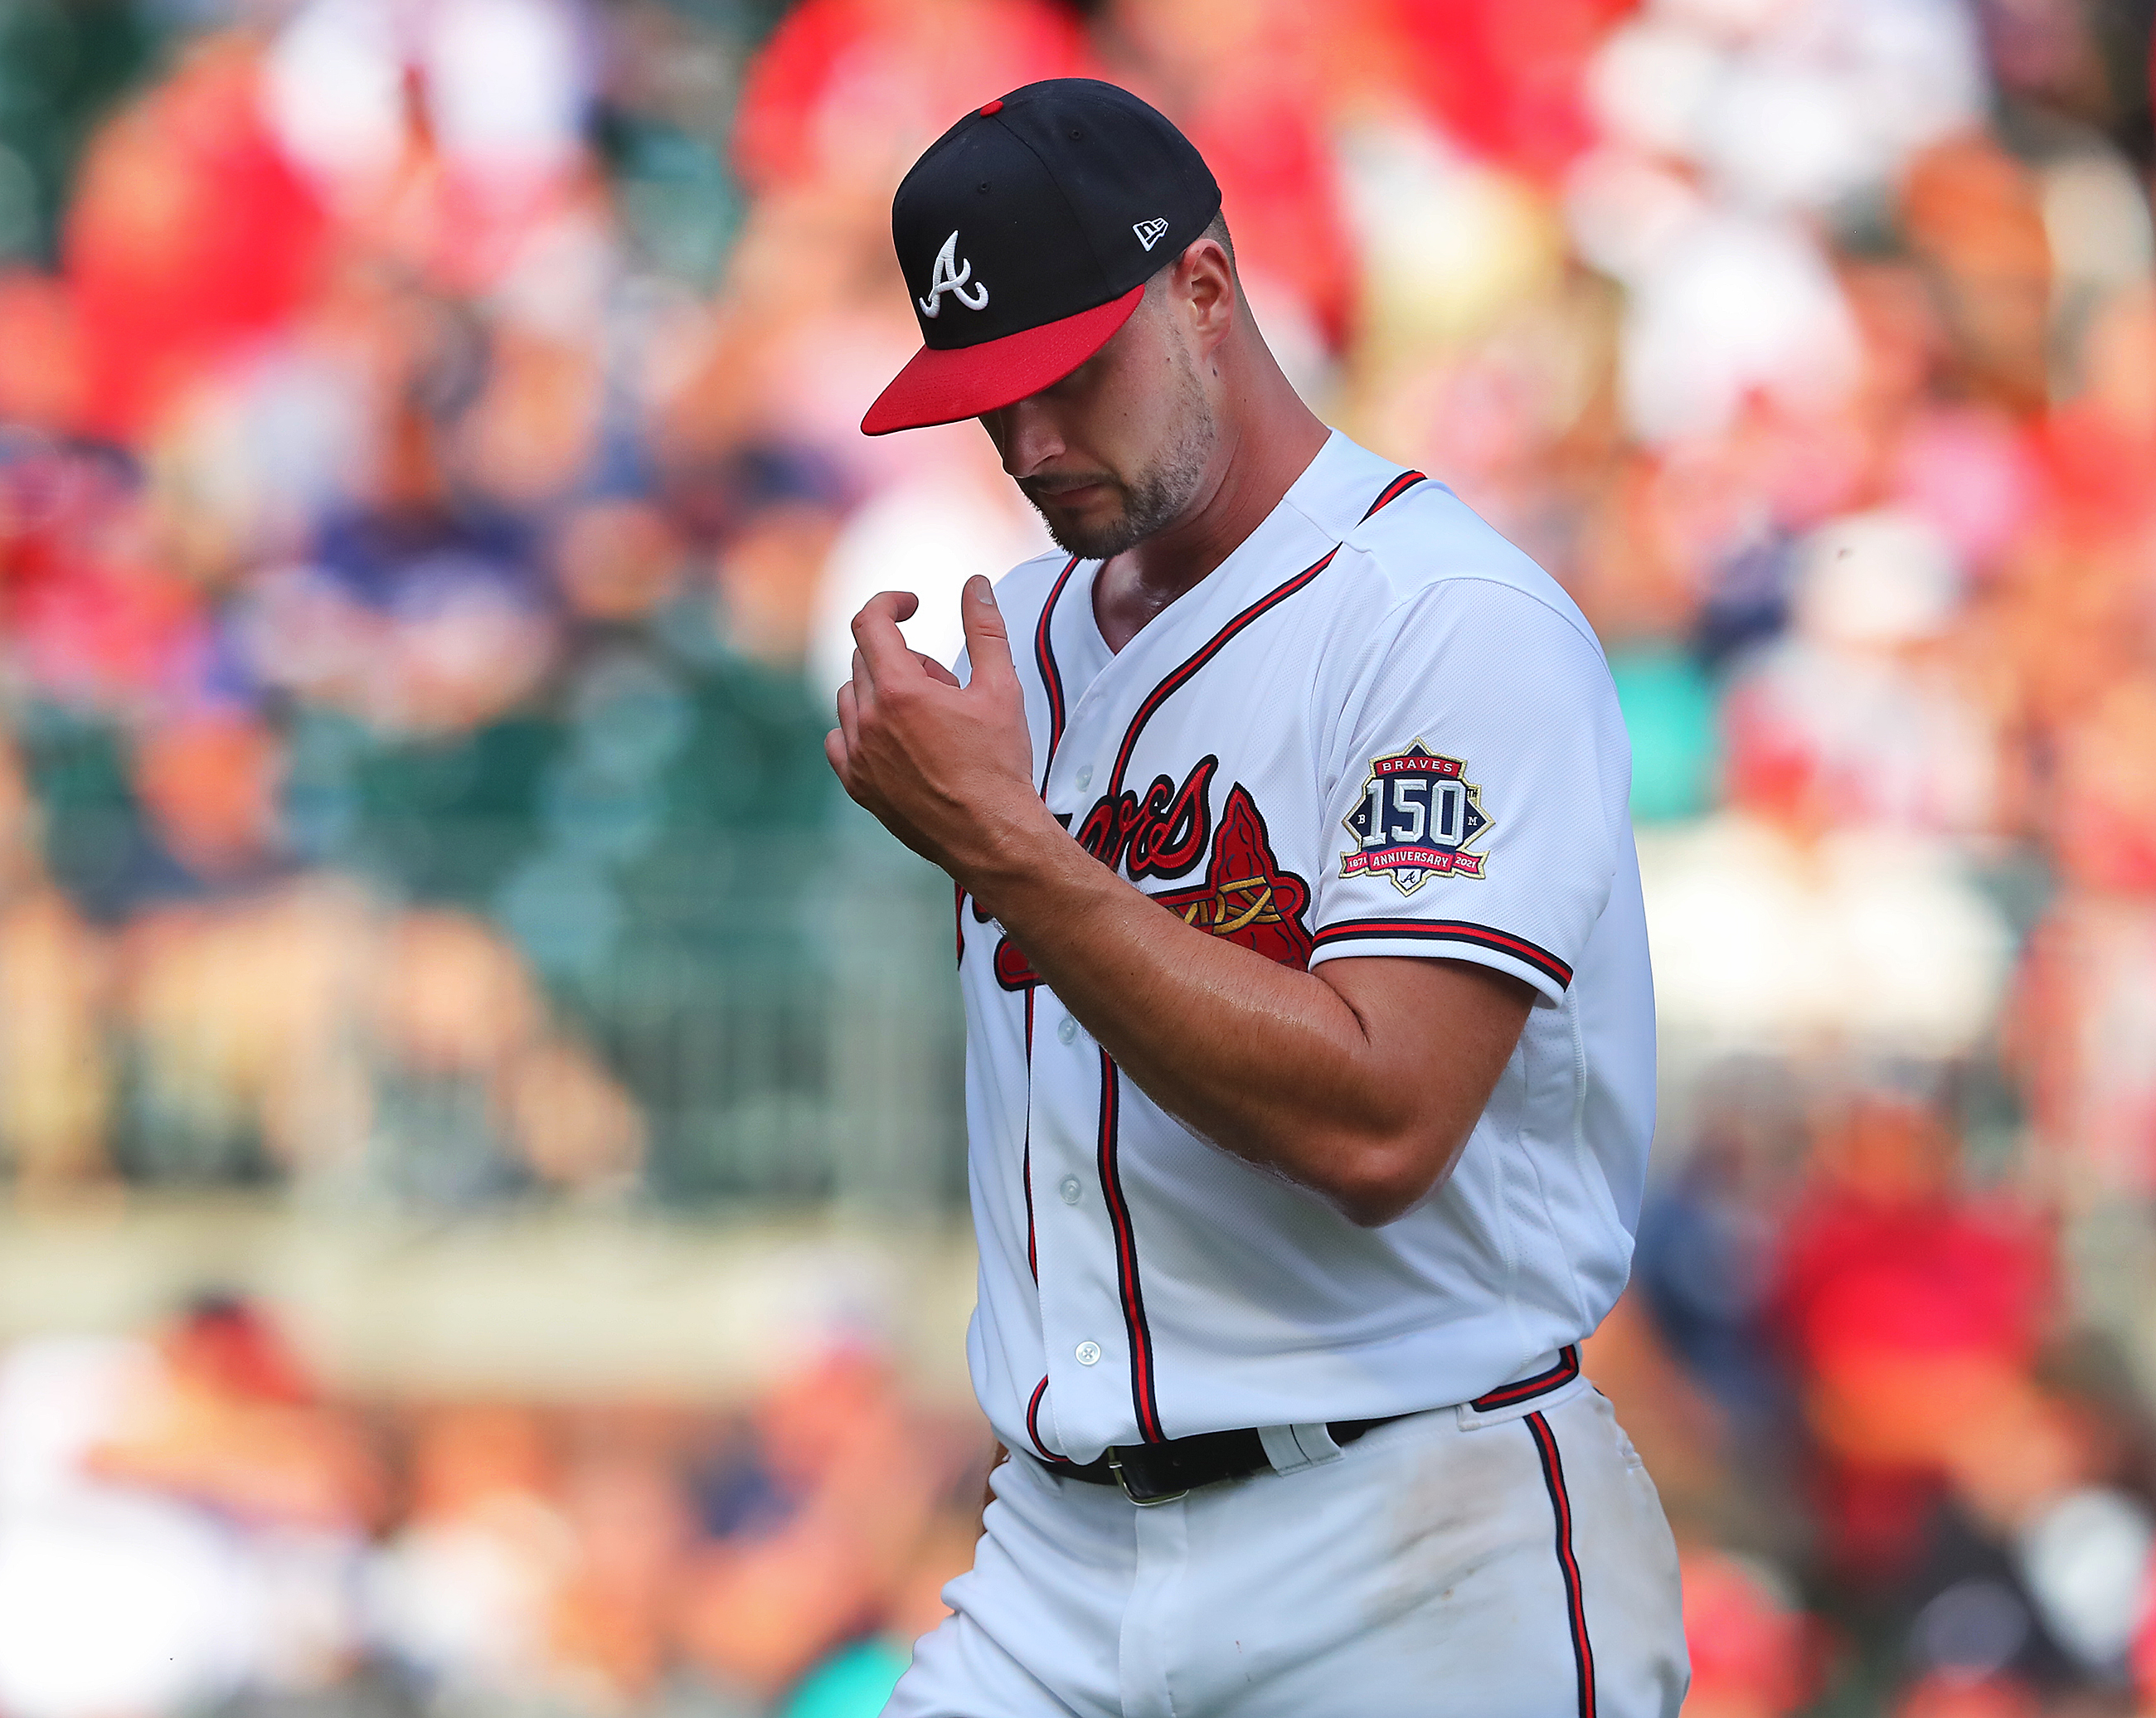 Braves' Muller sent to minors after poor start: 'It's a business